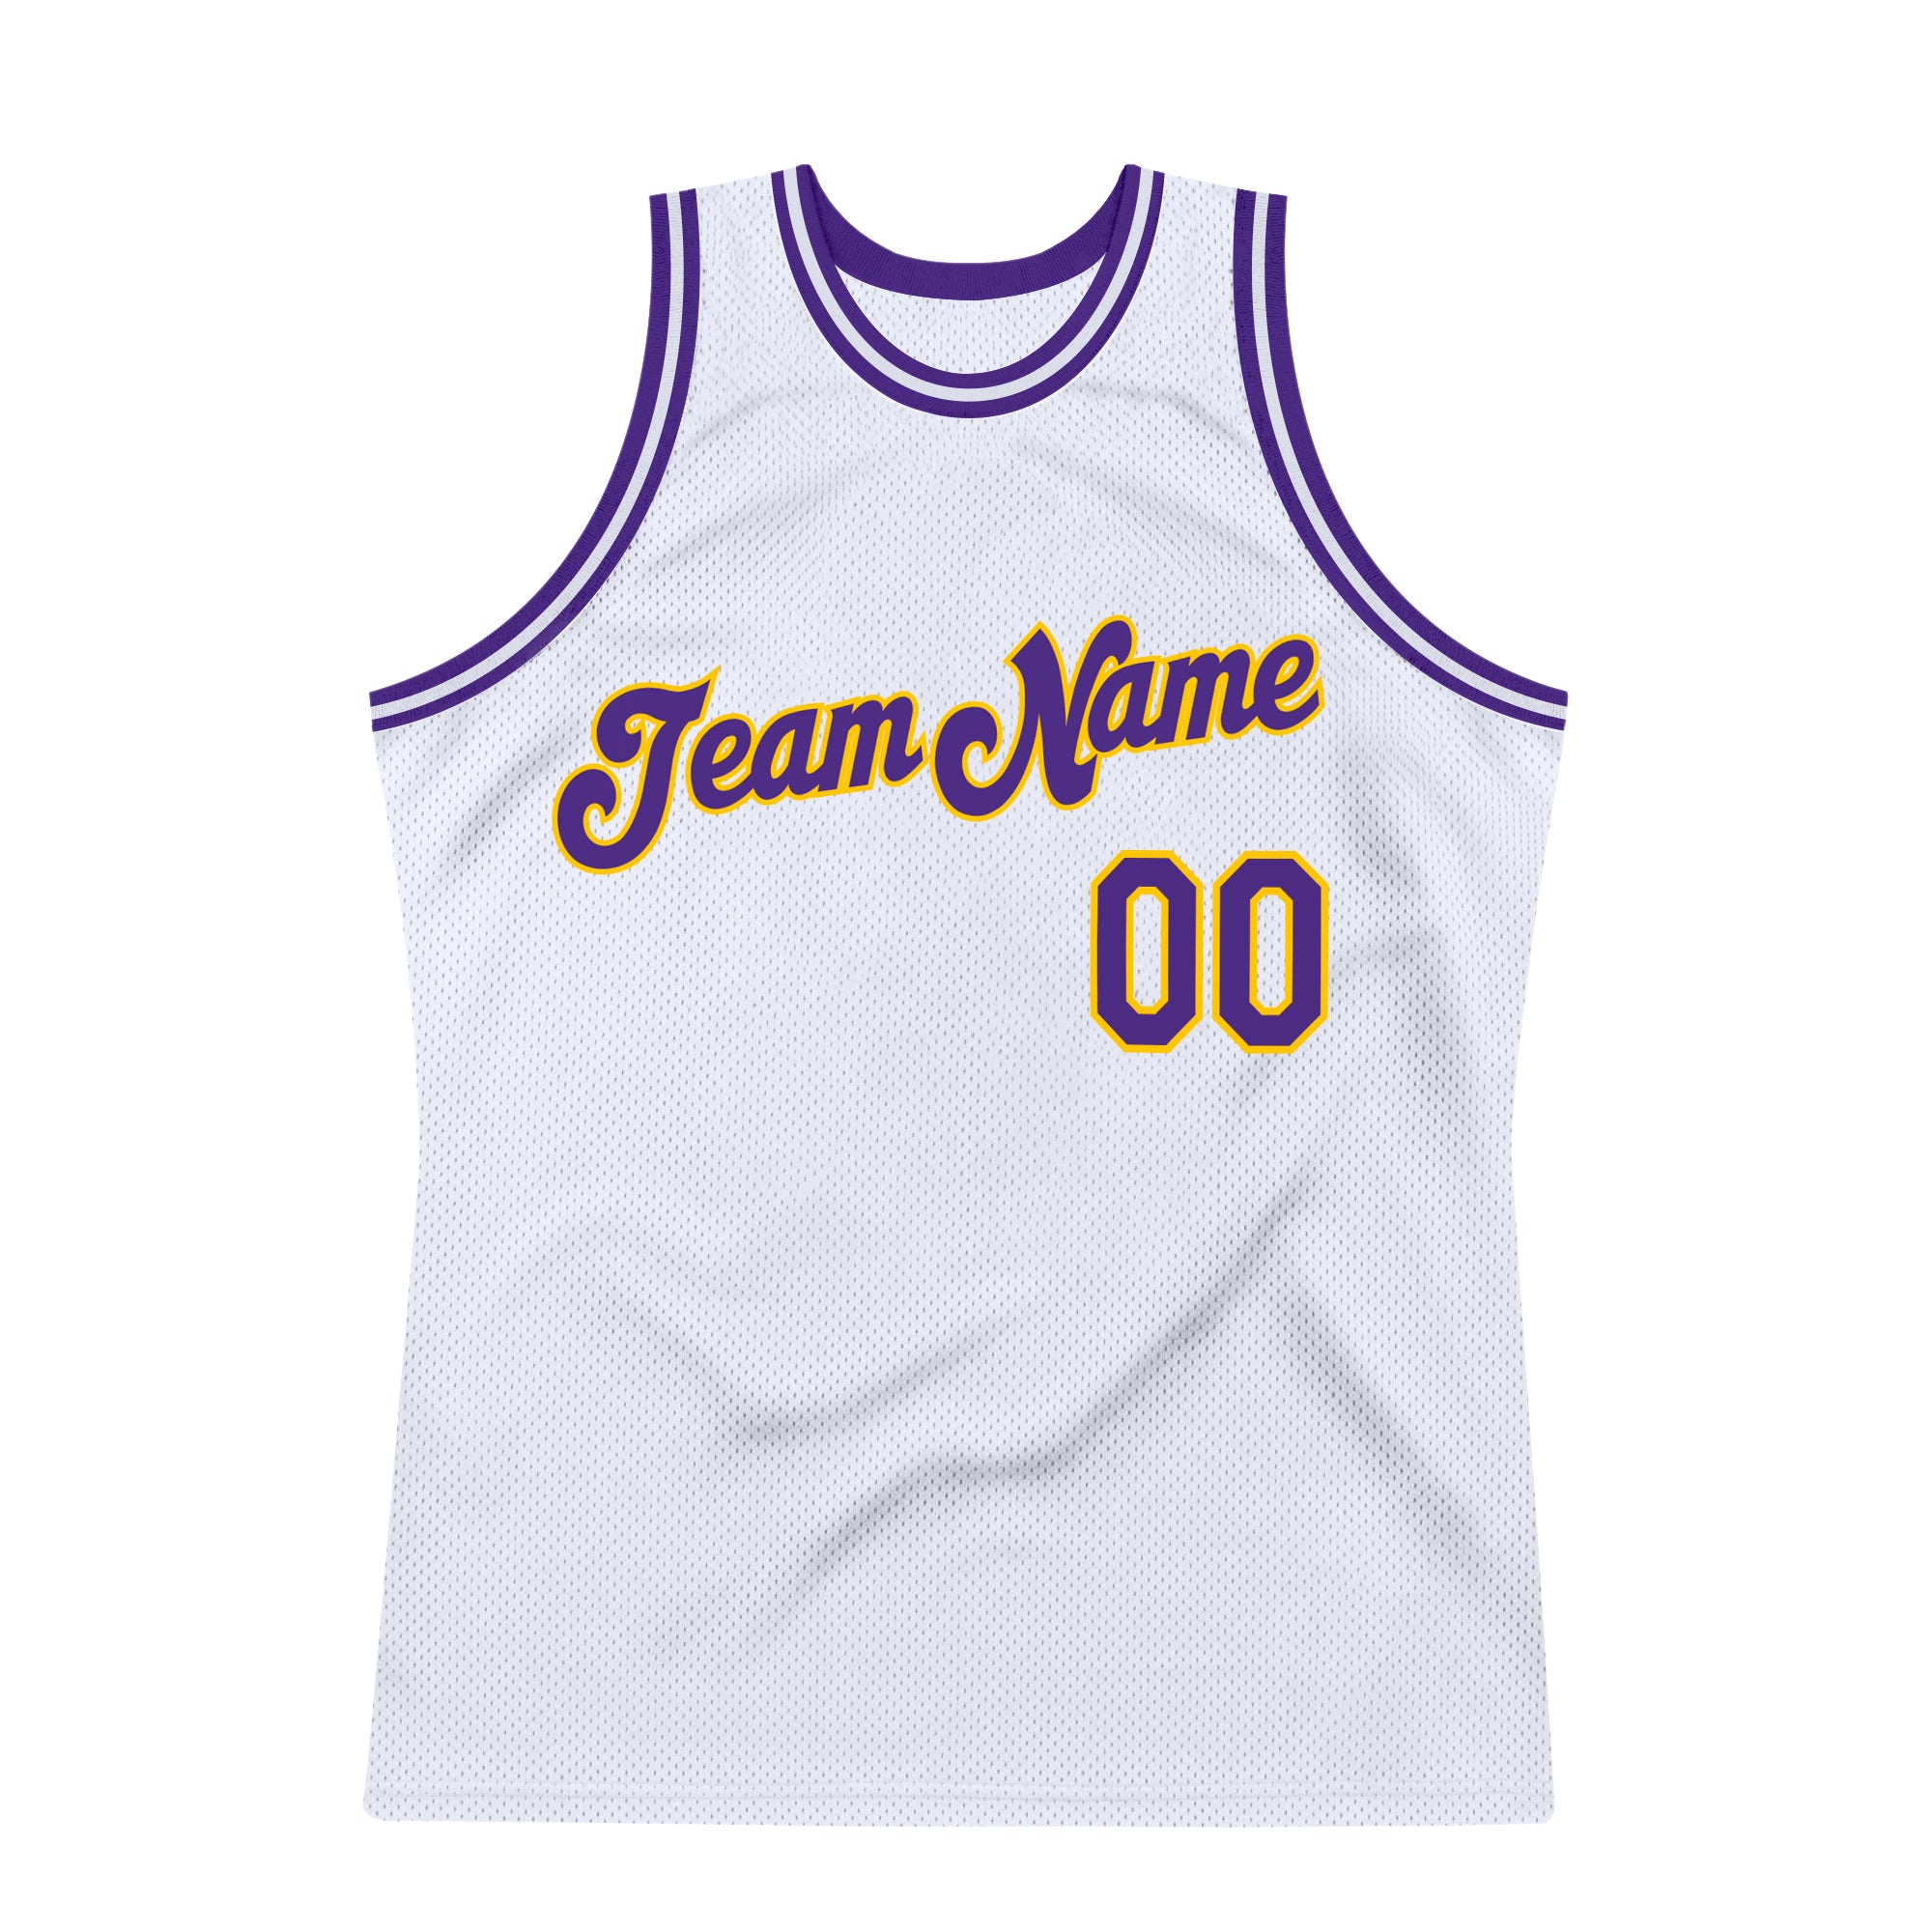 Gold Blooded 35 (Men's White Basketball Jersey) – Adapt.